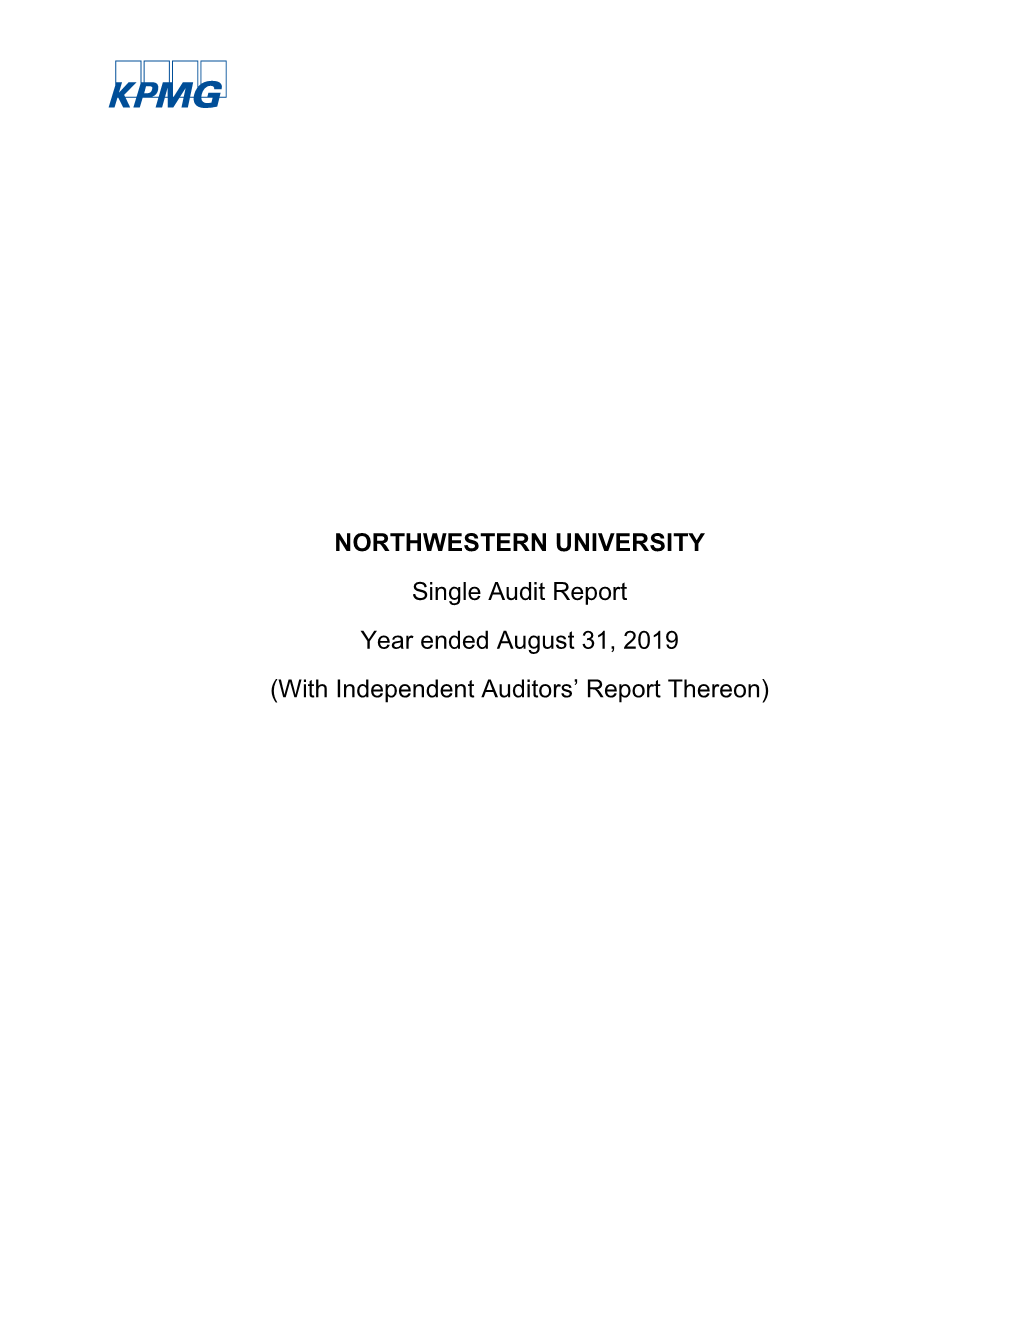 NORTHWESTERN UNIVERSITY Single Audit Report Year Ended August 31, 2019 (With Independent Auditors' Report Thereon)